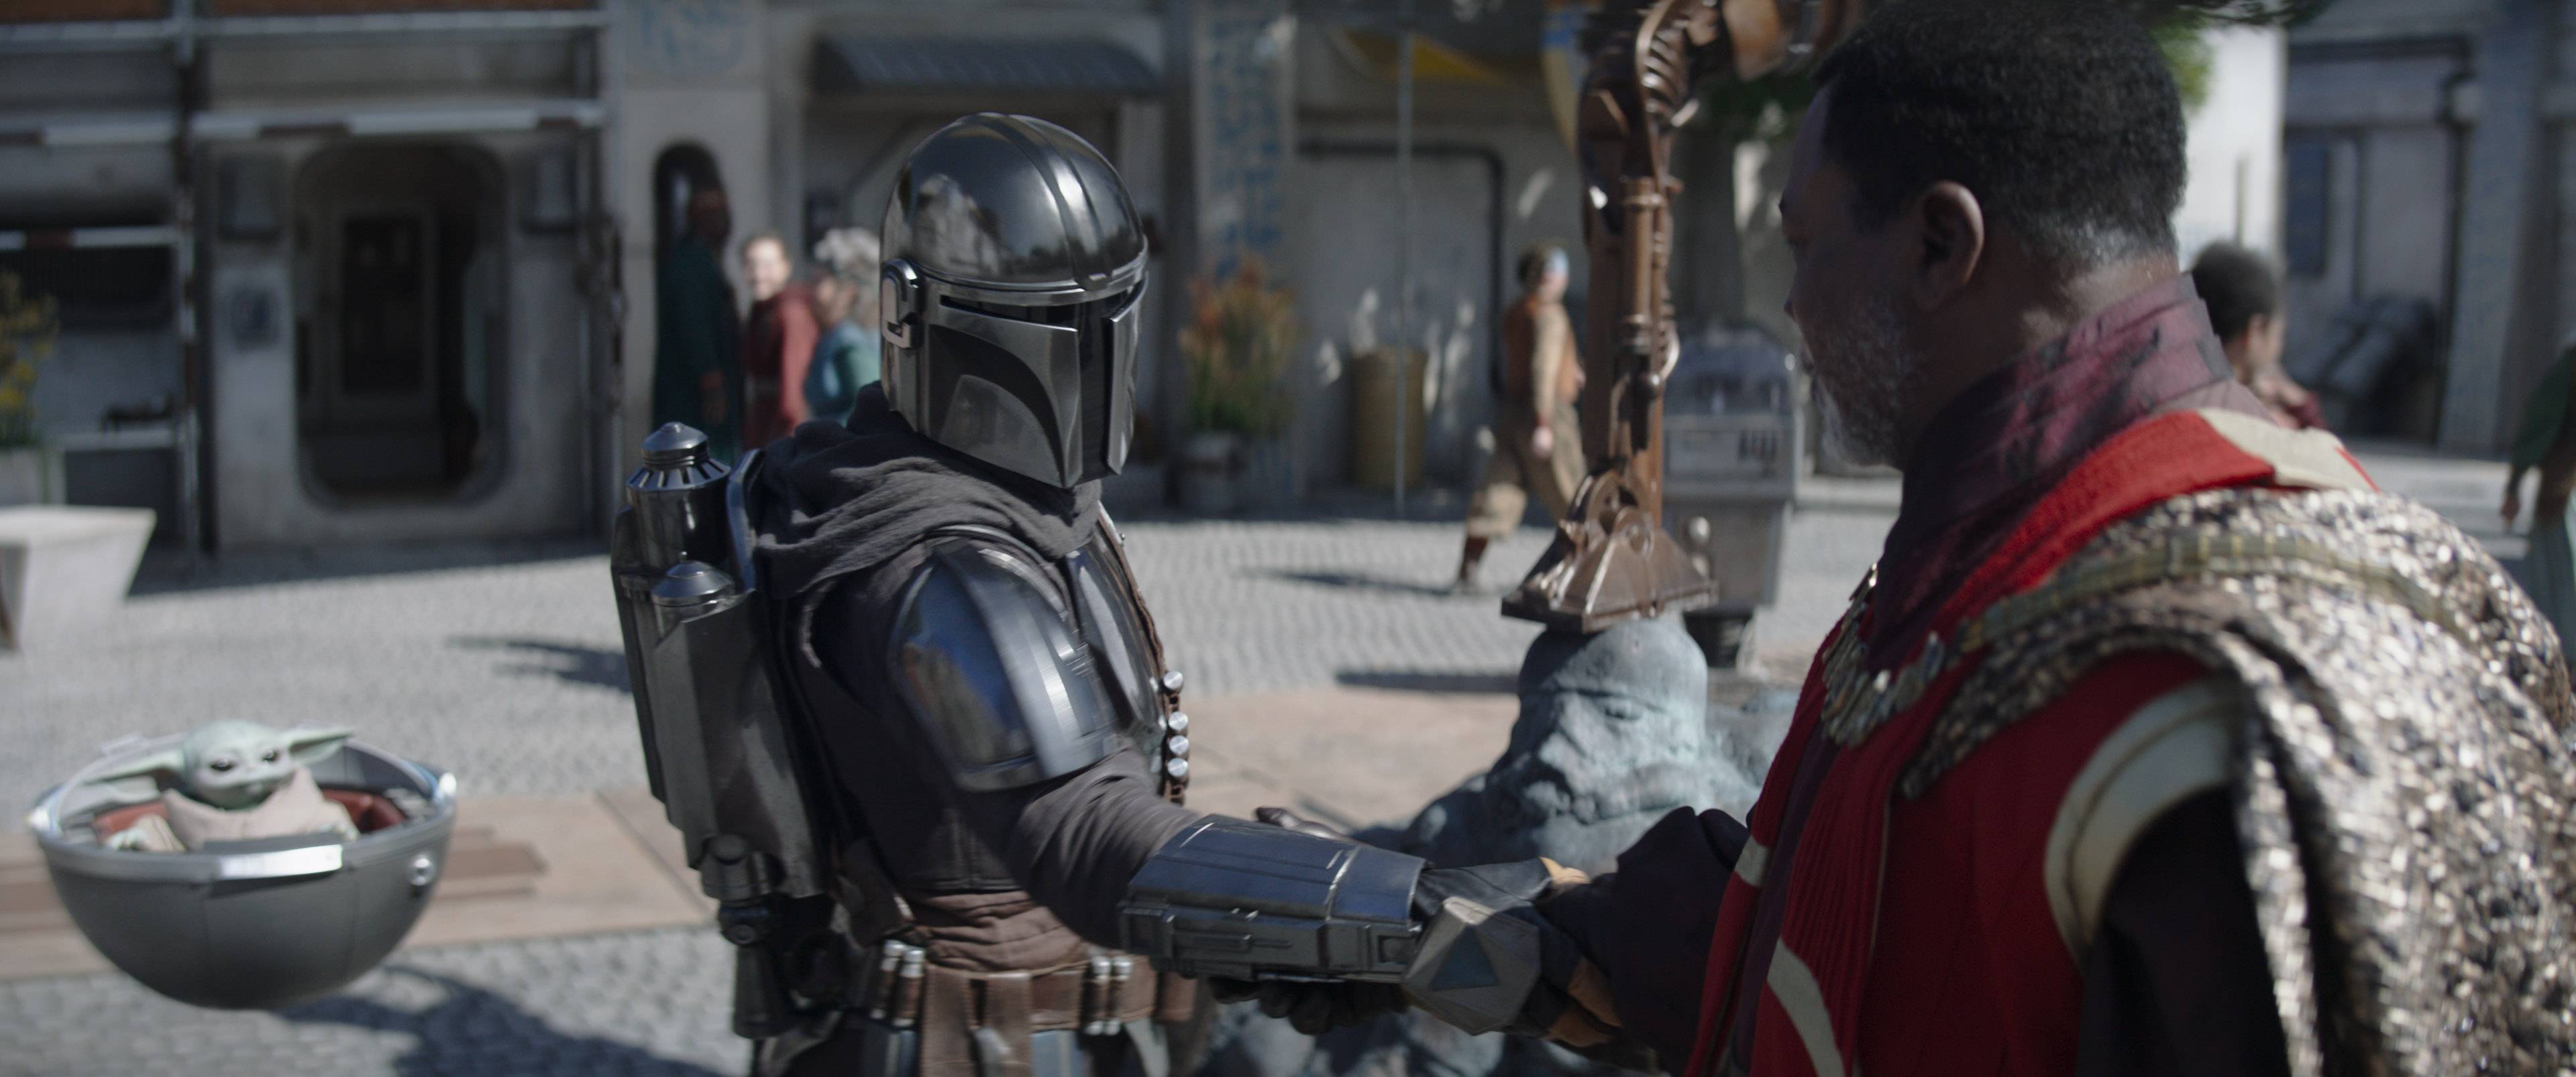 The Mandalorian has been a hit show for the Disney+ streaming platform